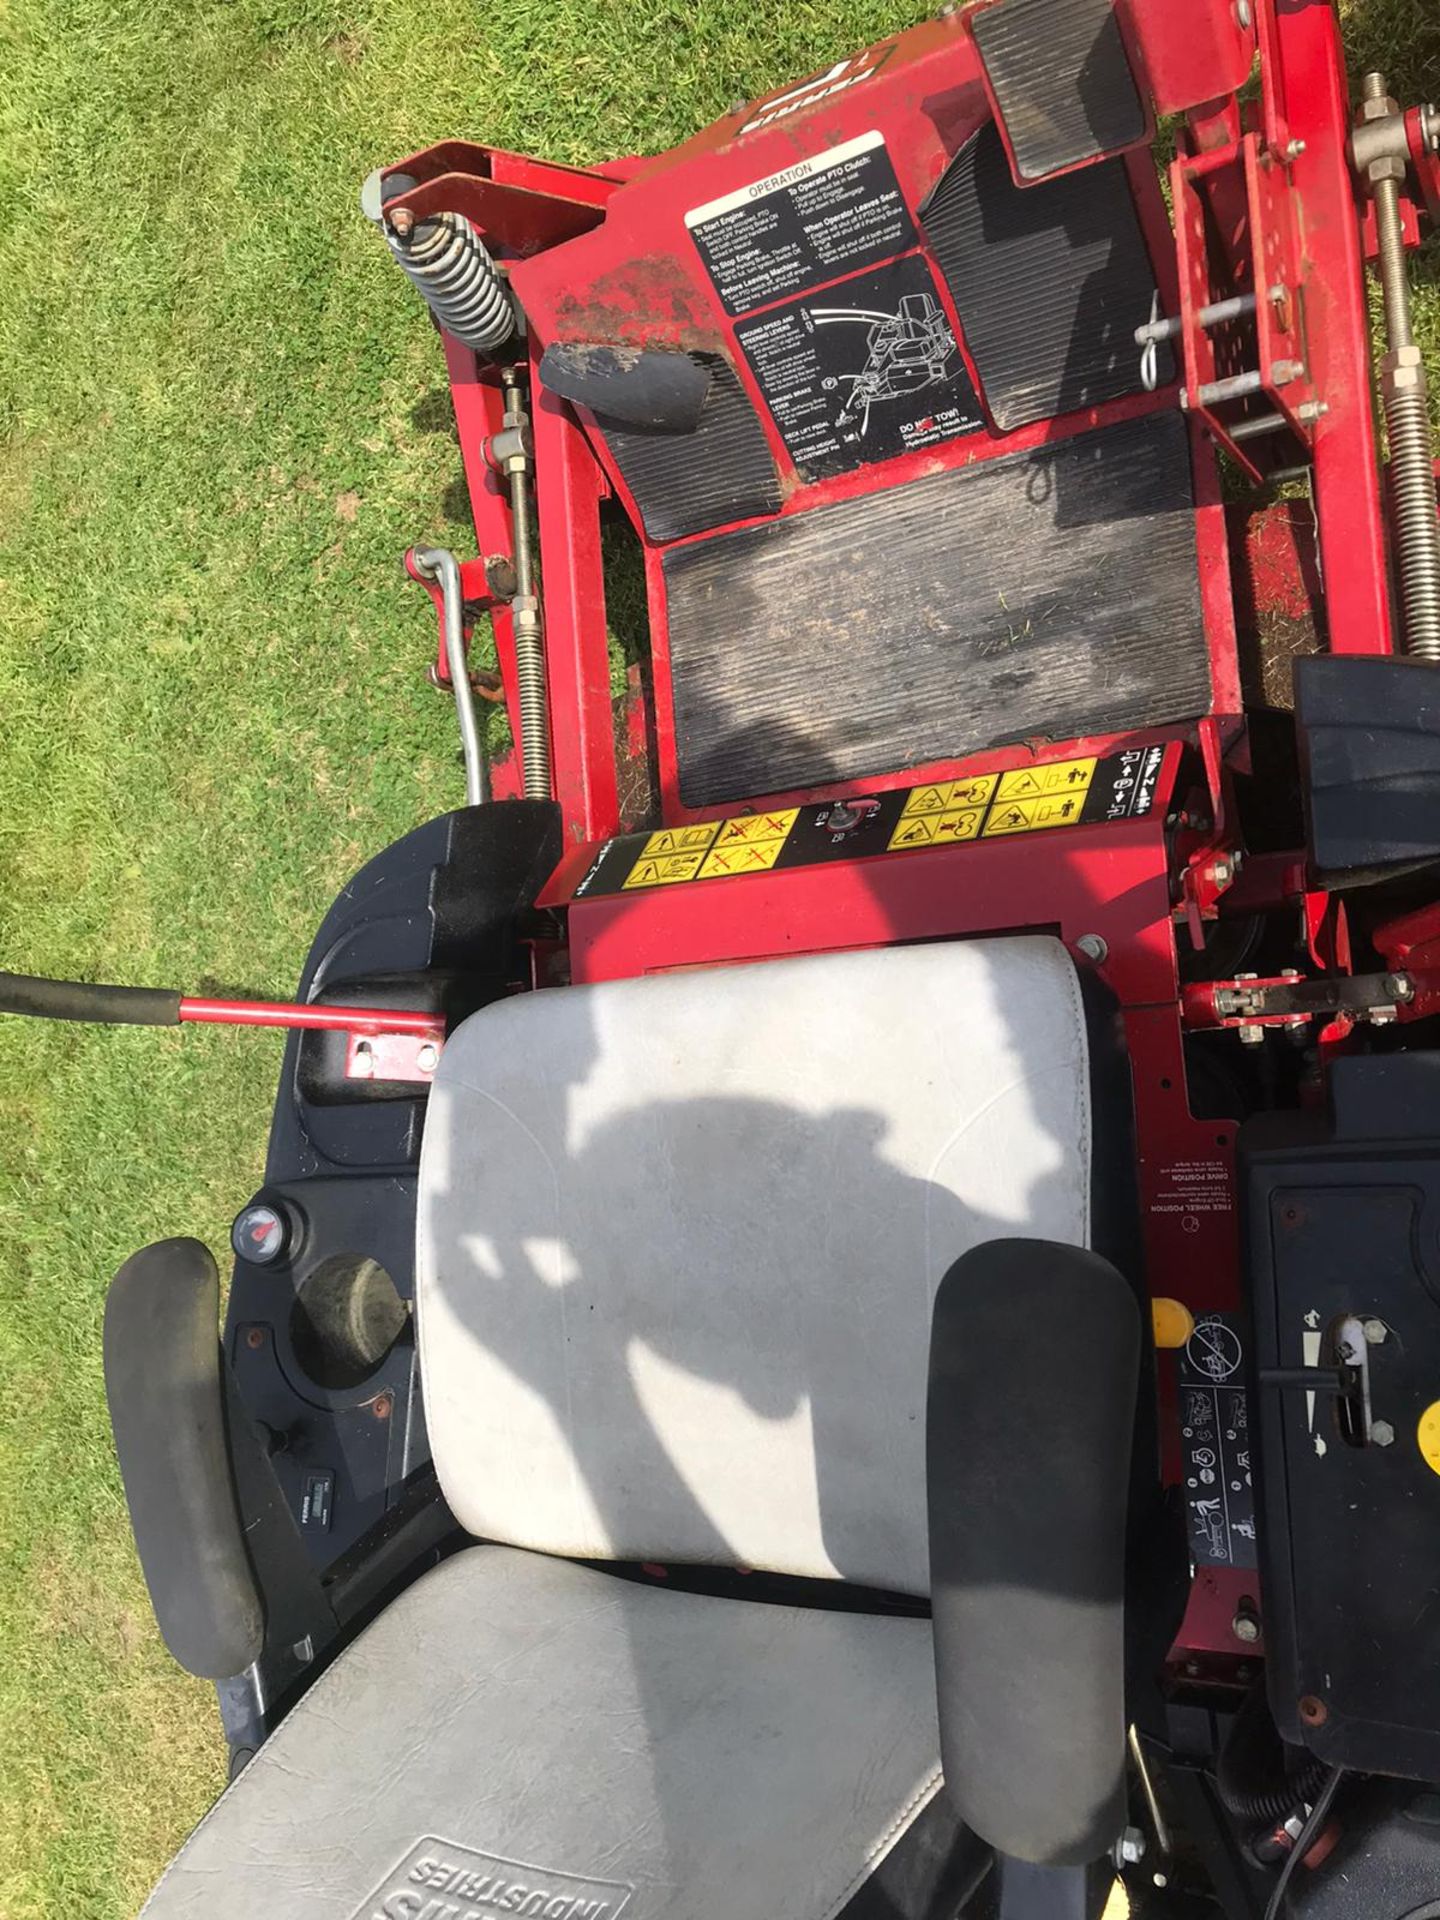 FERRIS IS1000 RIDE ON ZERO TURN LAWN MOWER, 778 HOURS, RUNS, DRIVES AND CUTS, CLEAN MACHINE - Image 5 of 5